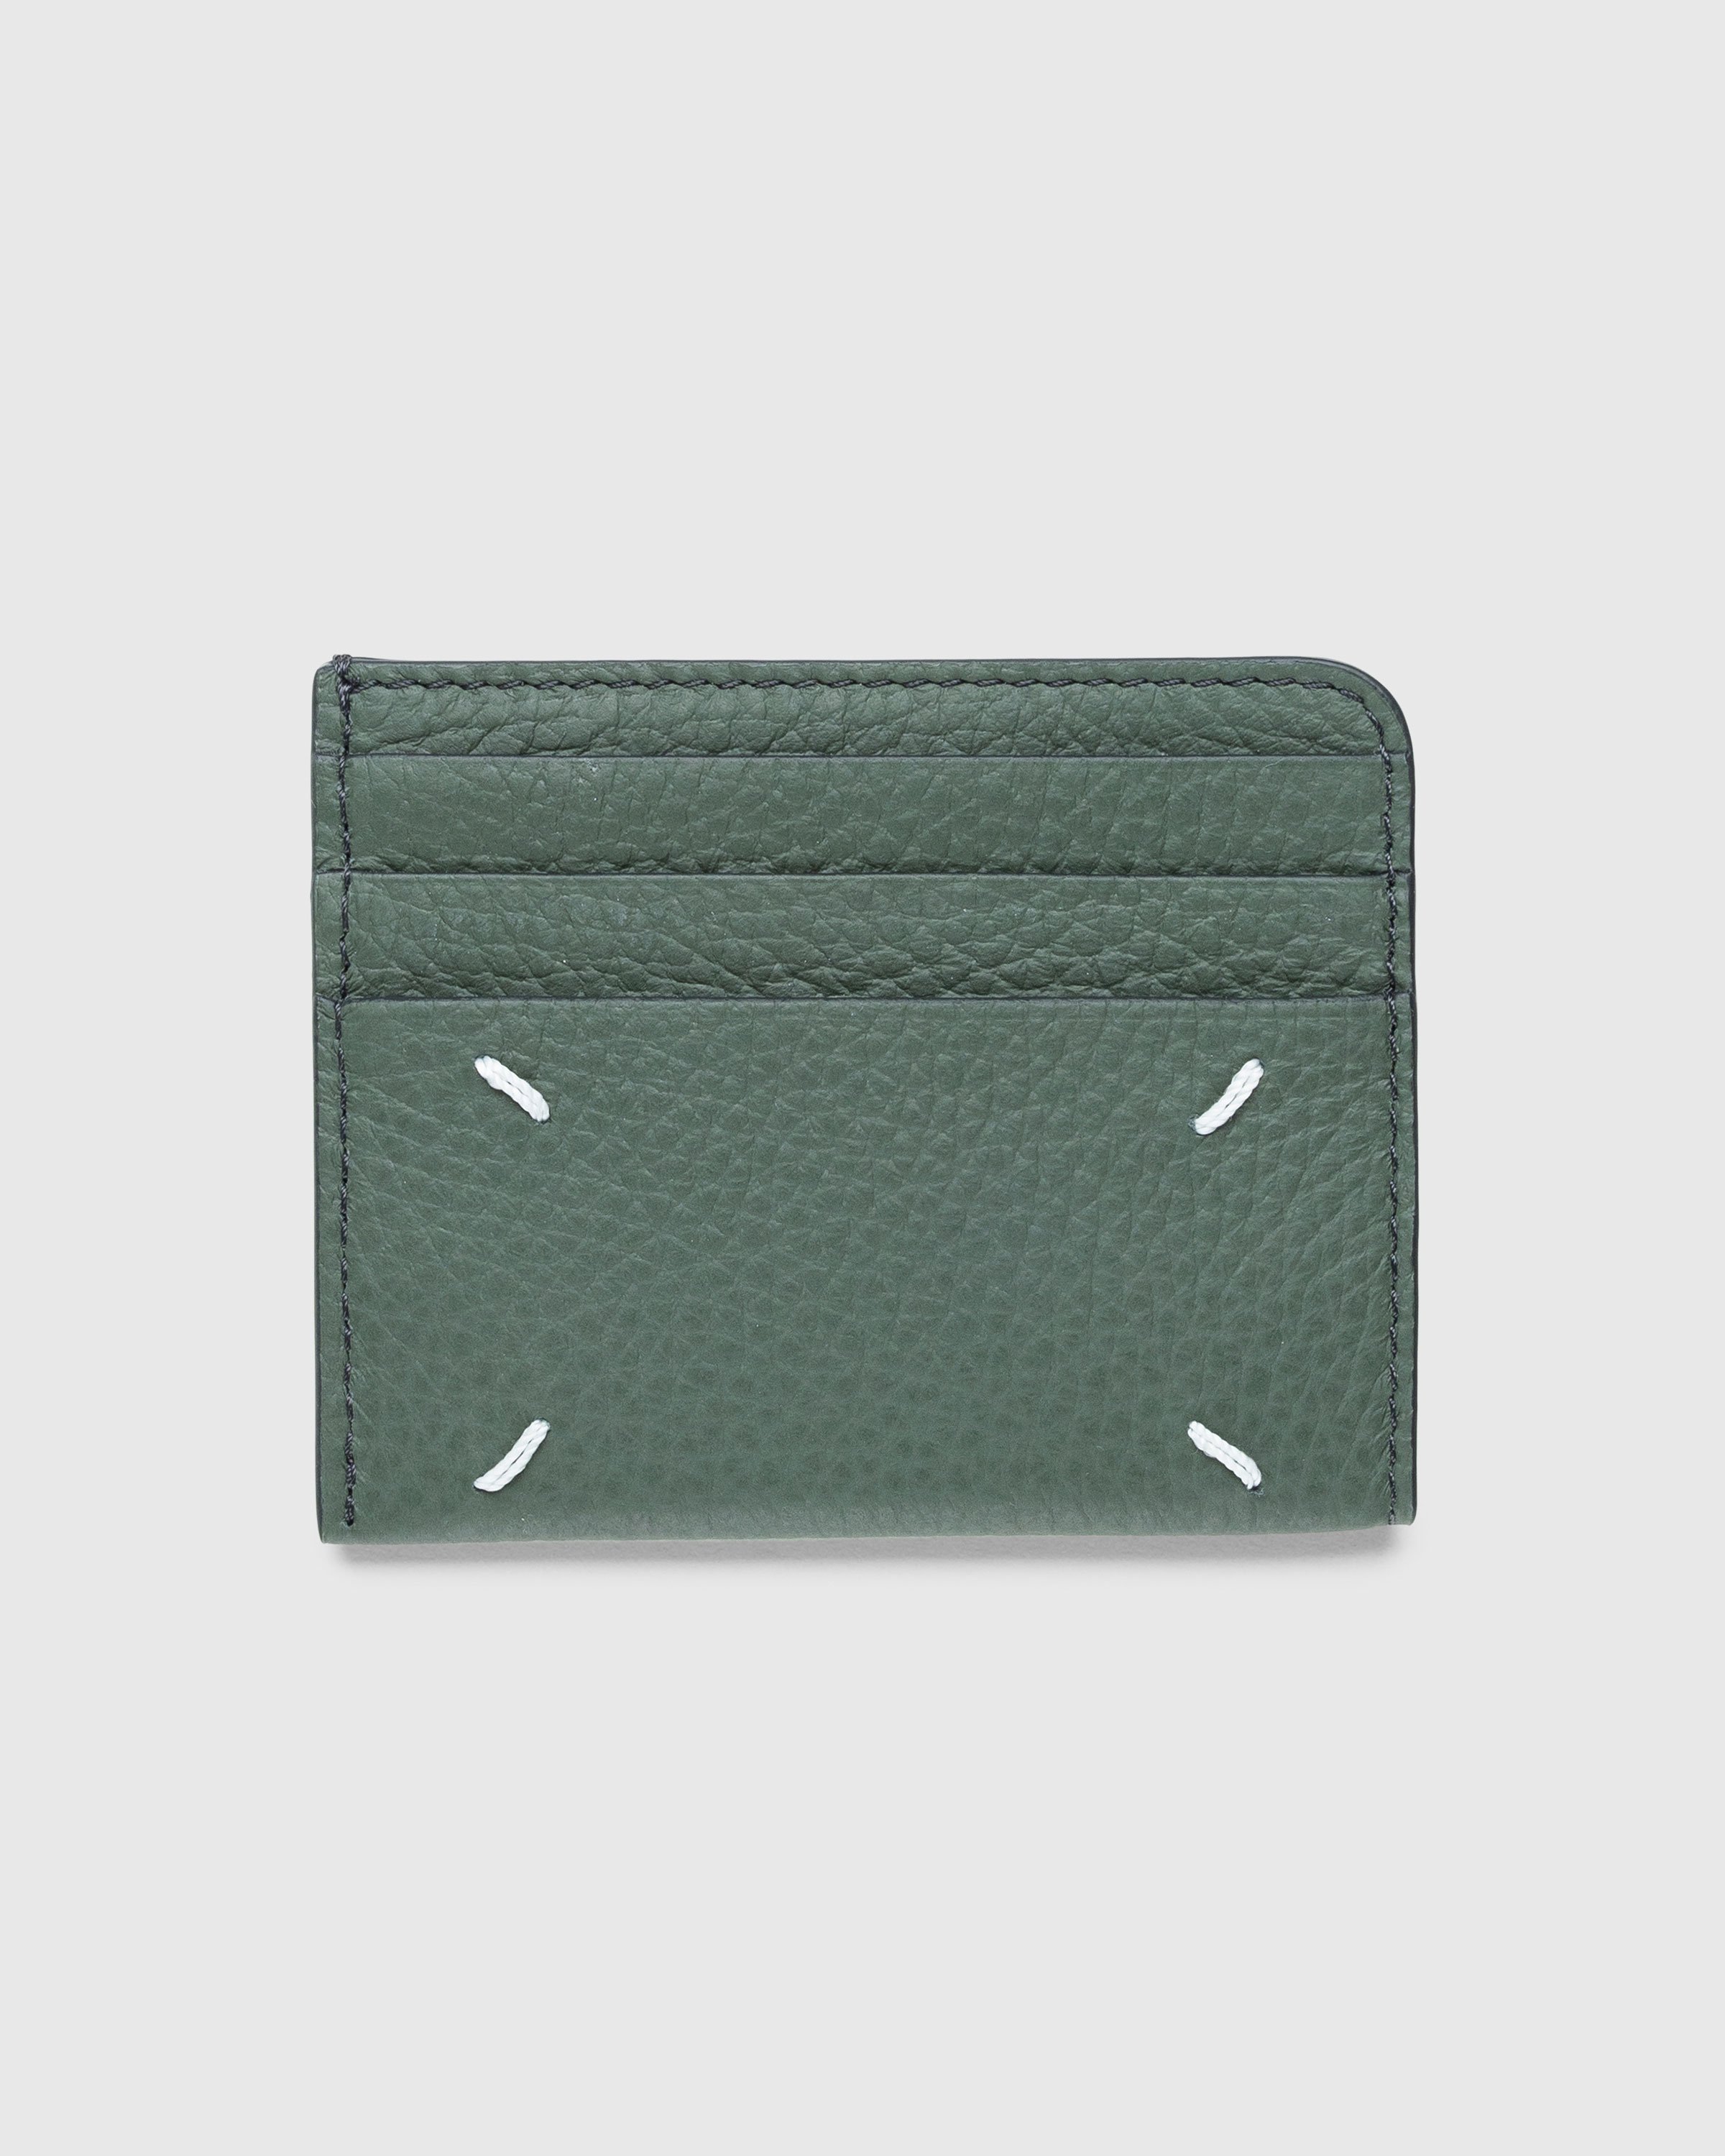 Maison Margiela - Leather Card Holder Thyme - Accessories - Green - Image 1